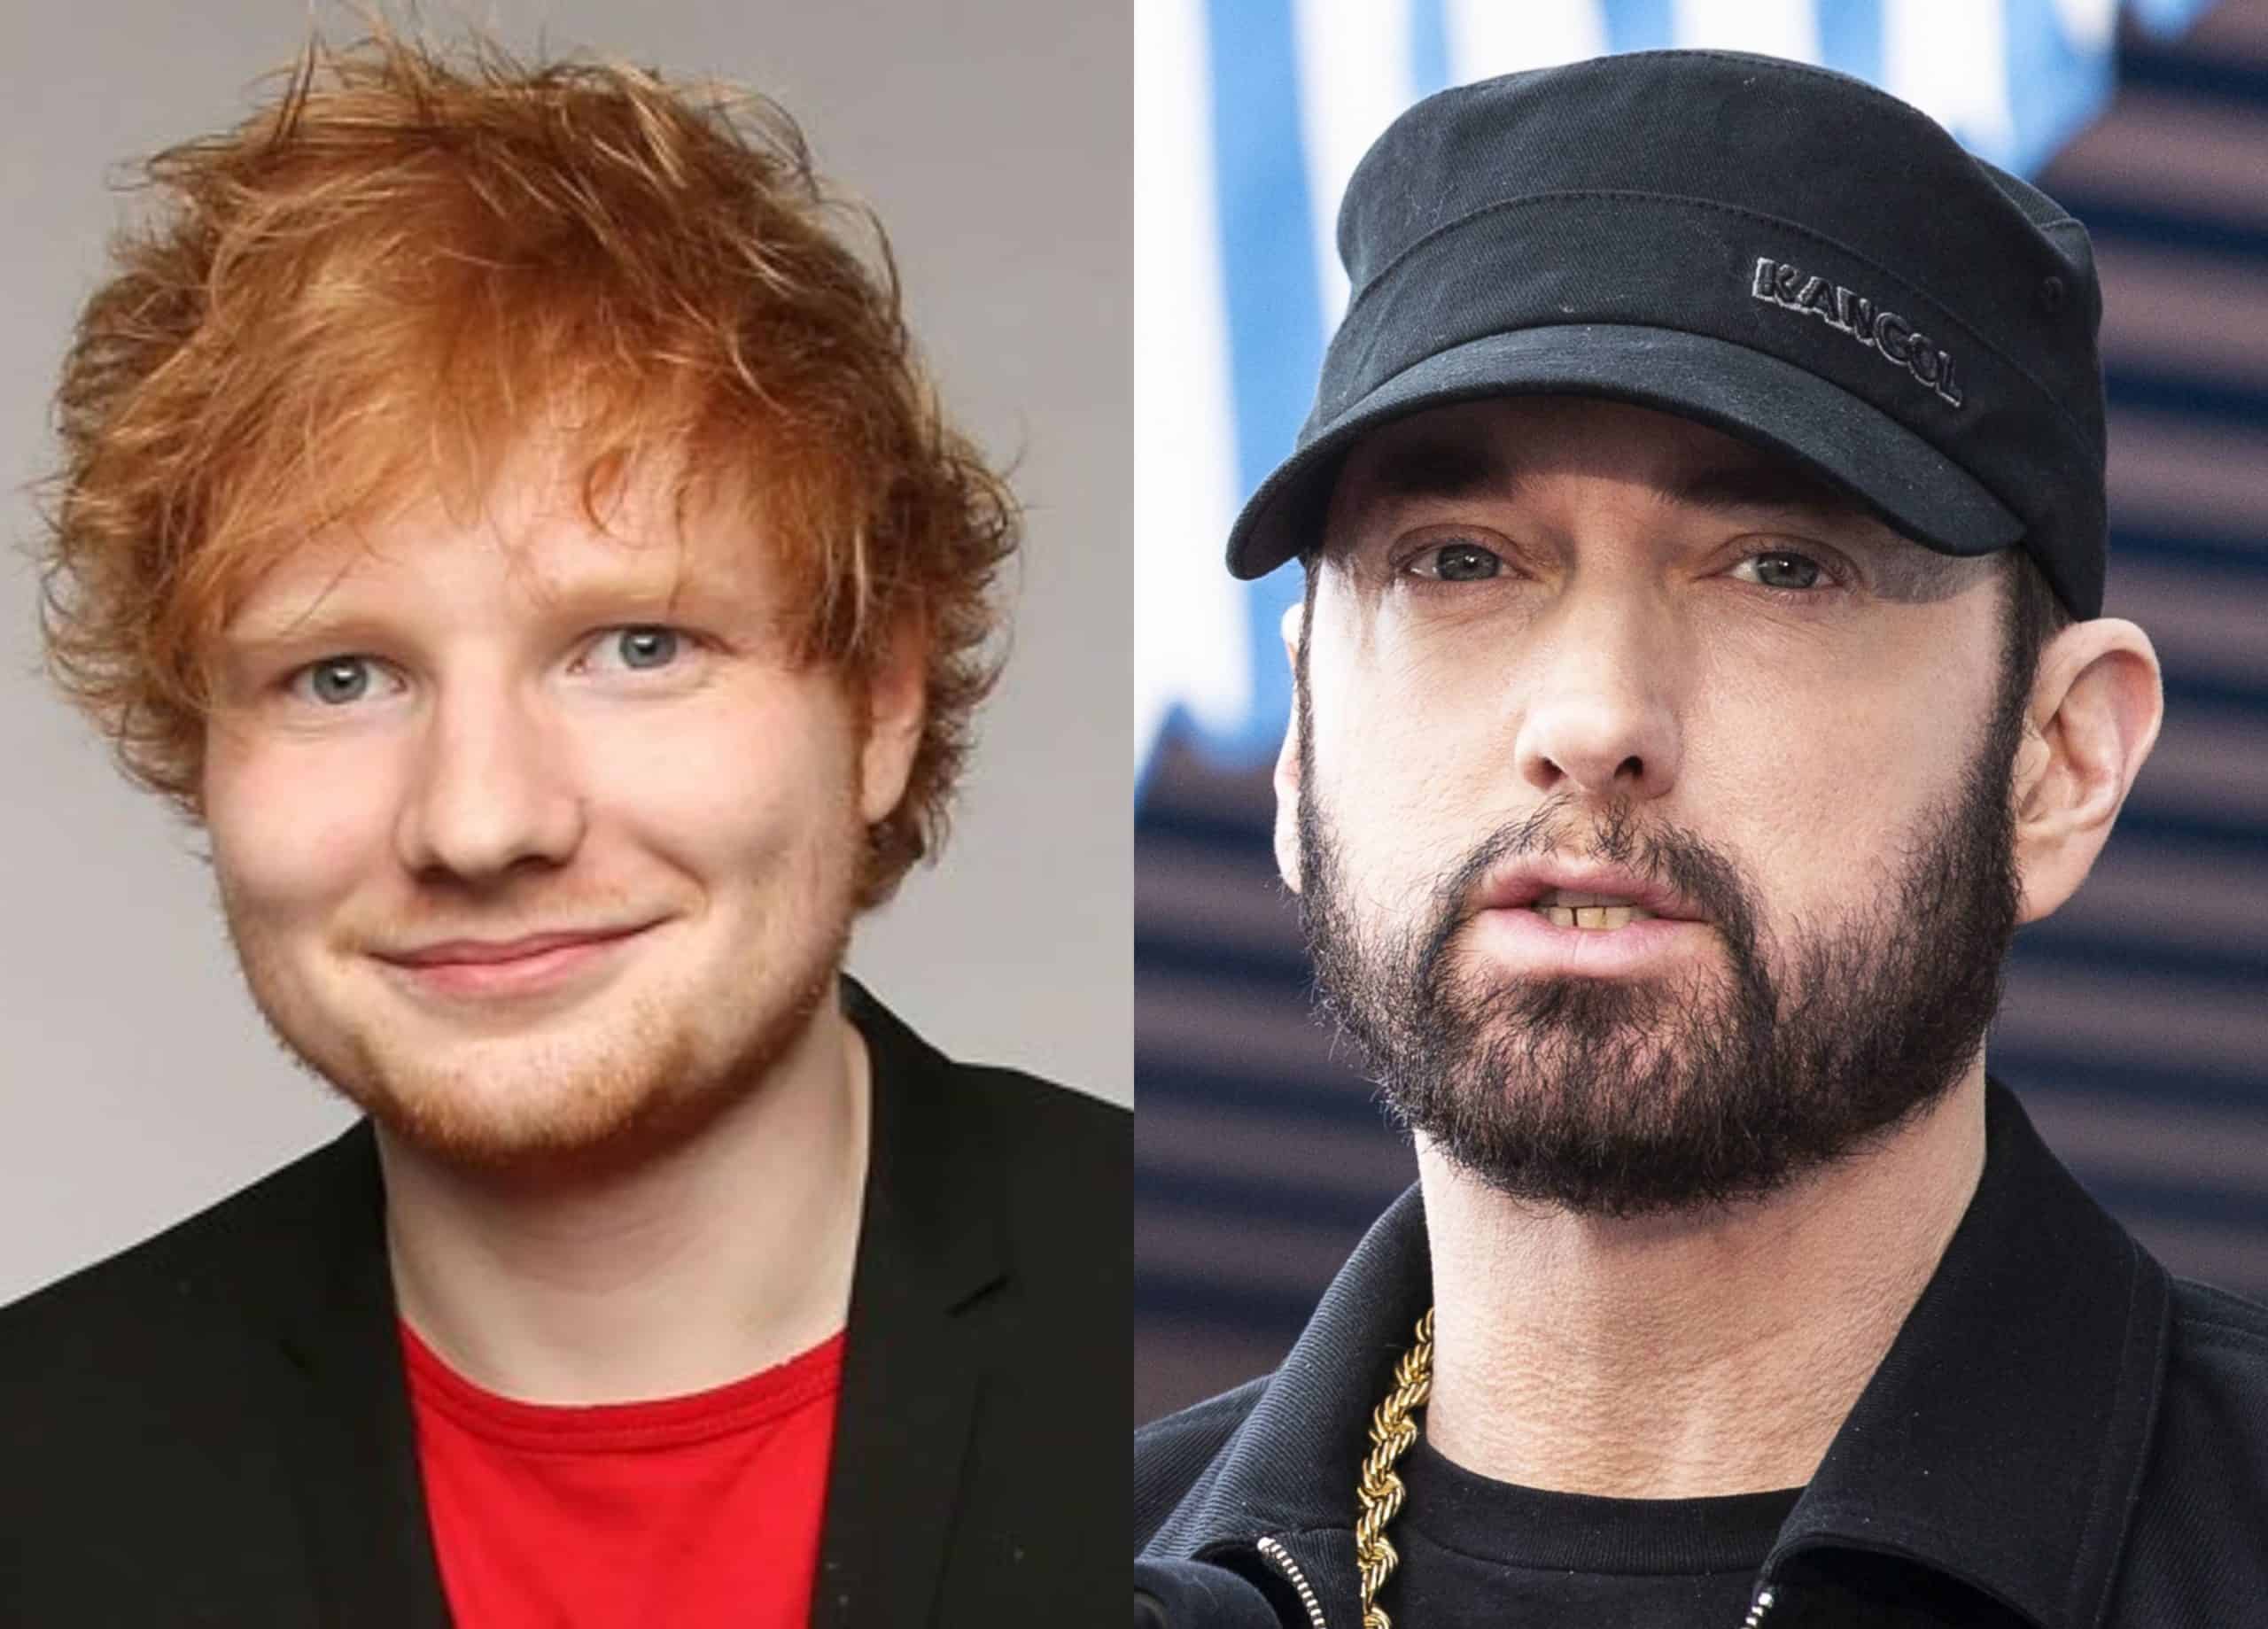 Ed Sheeran Recalls First Meeting with Eminem We Spoke About Marvel & Avengers For 4 Hours